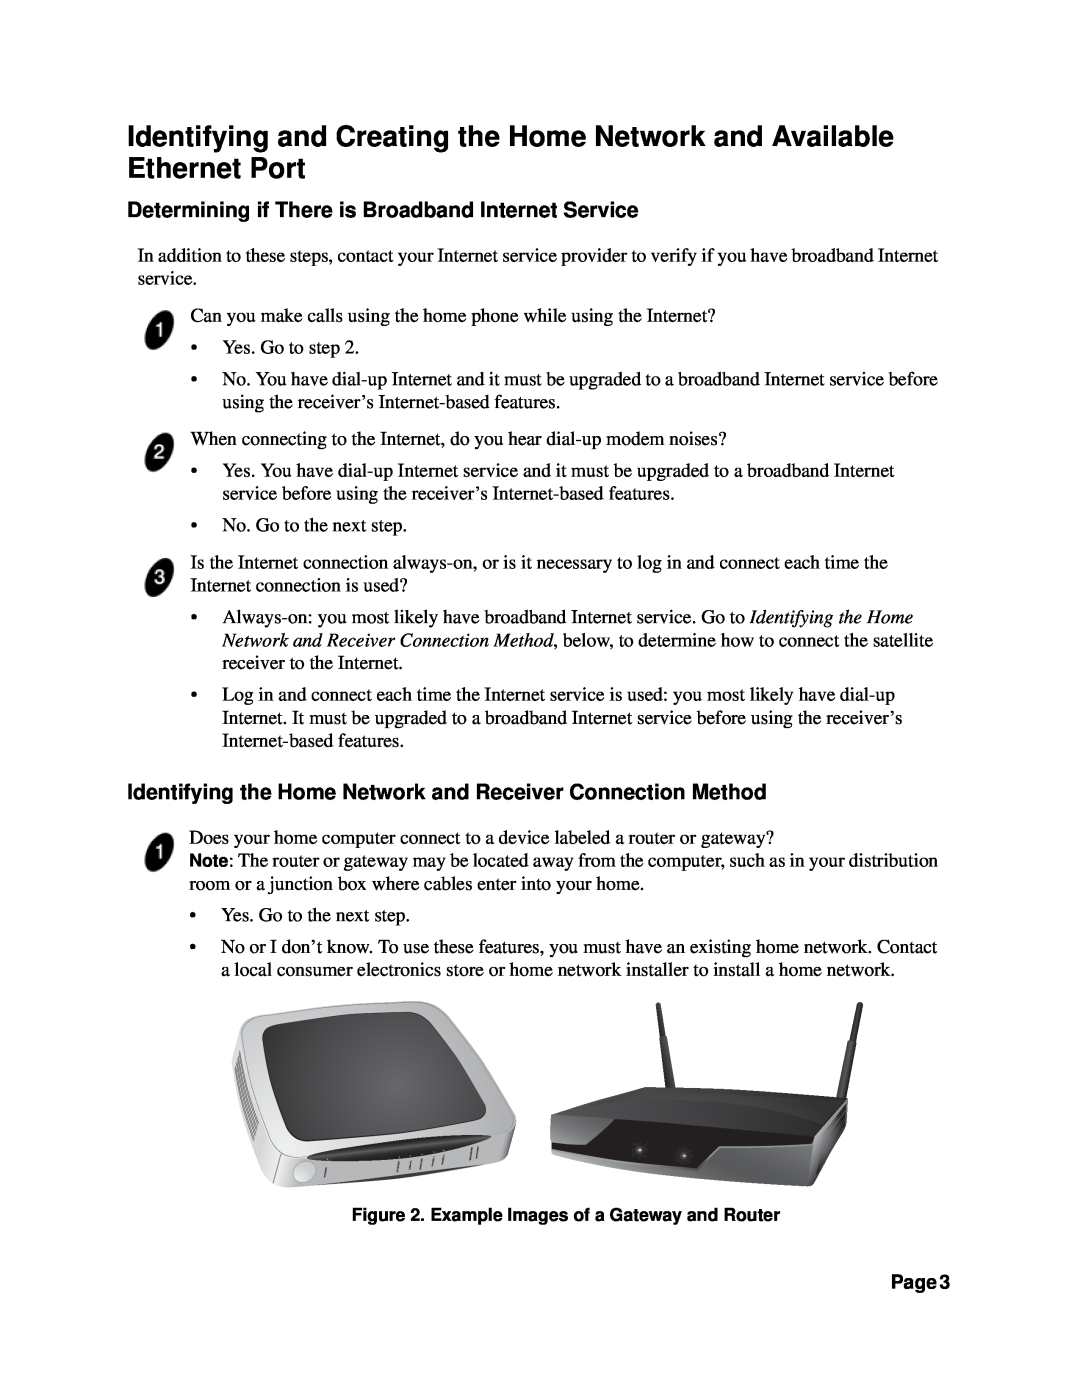 Dish Network HOME NETWORK manual Identifying and Creating the Home Network and Available Ethernet Port, Page 